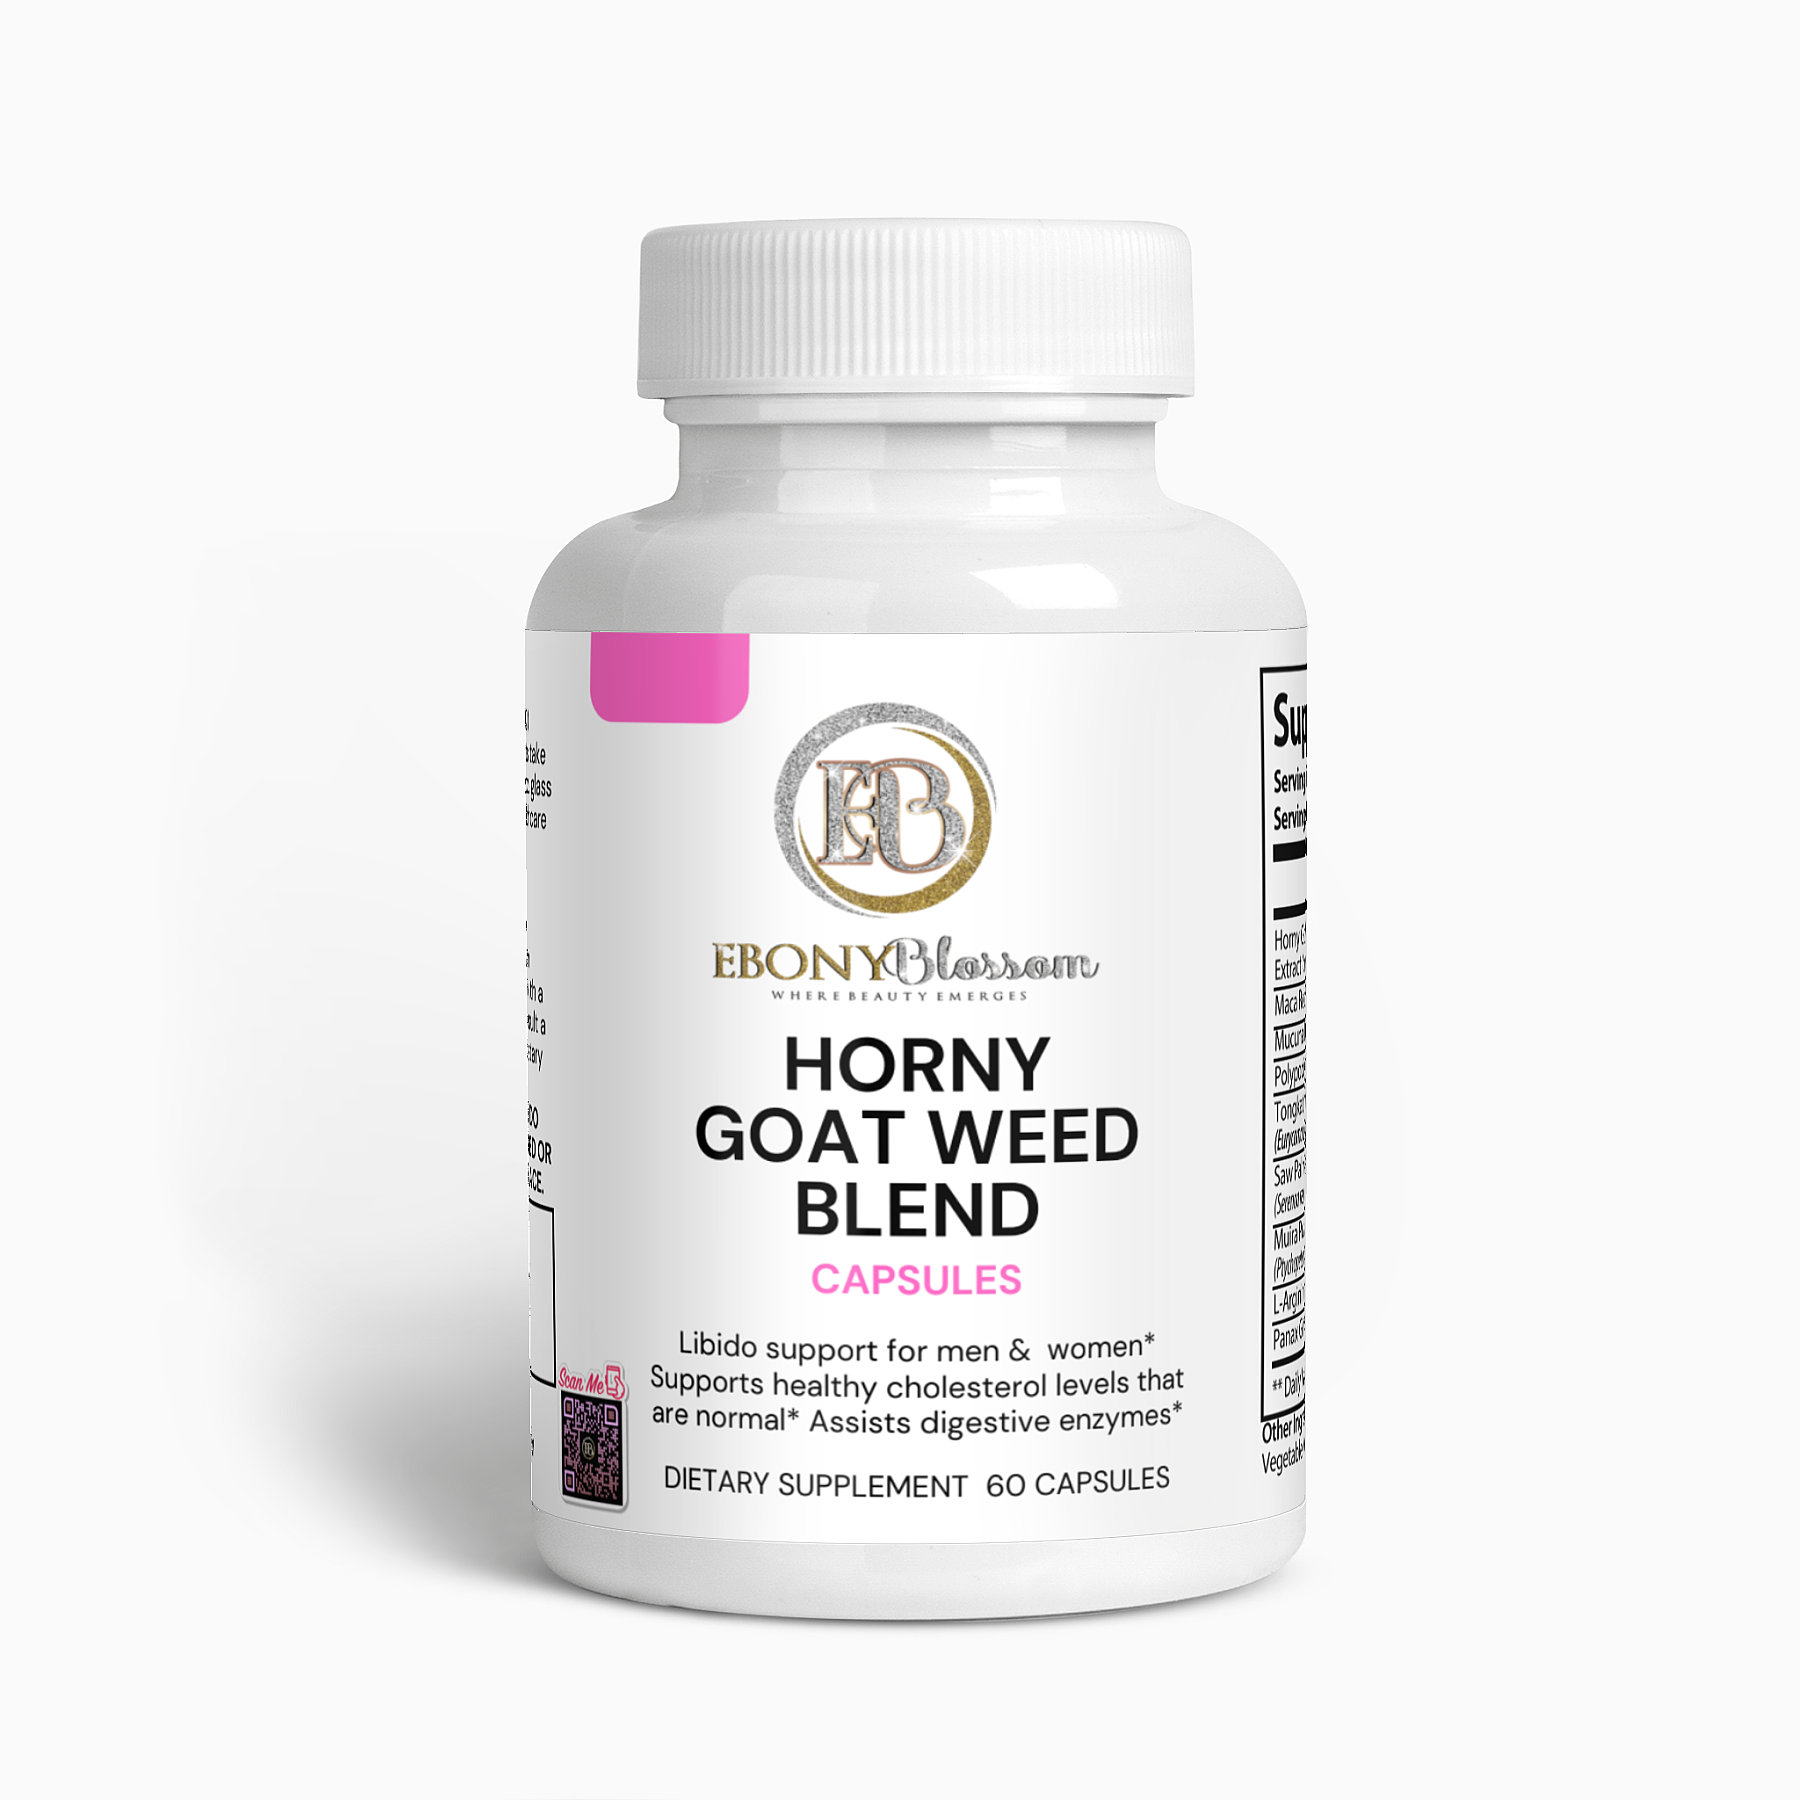 Horny Goat Weed Blend